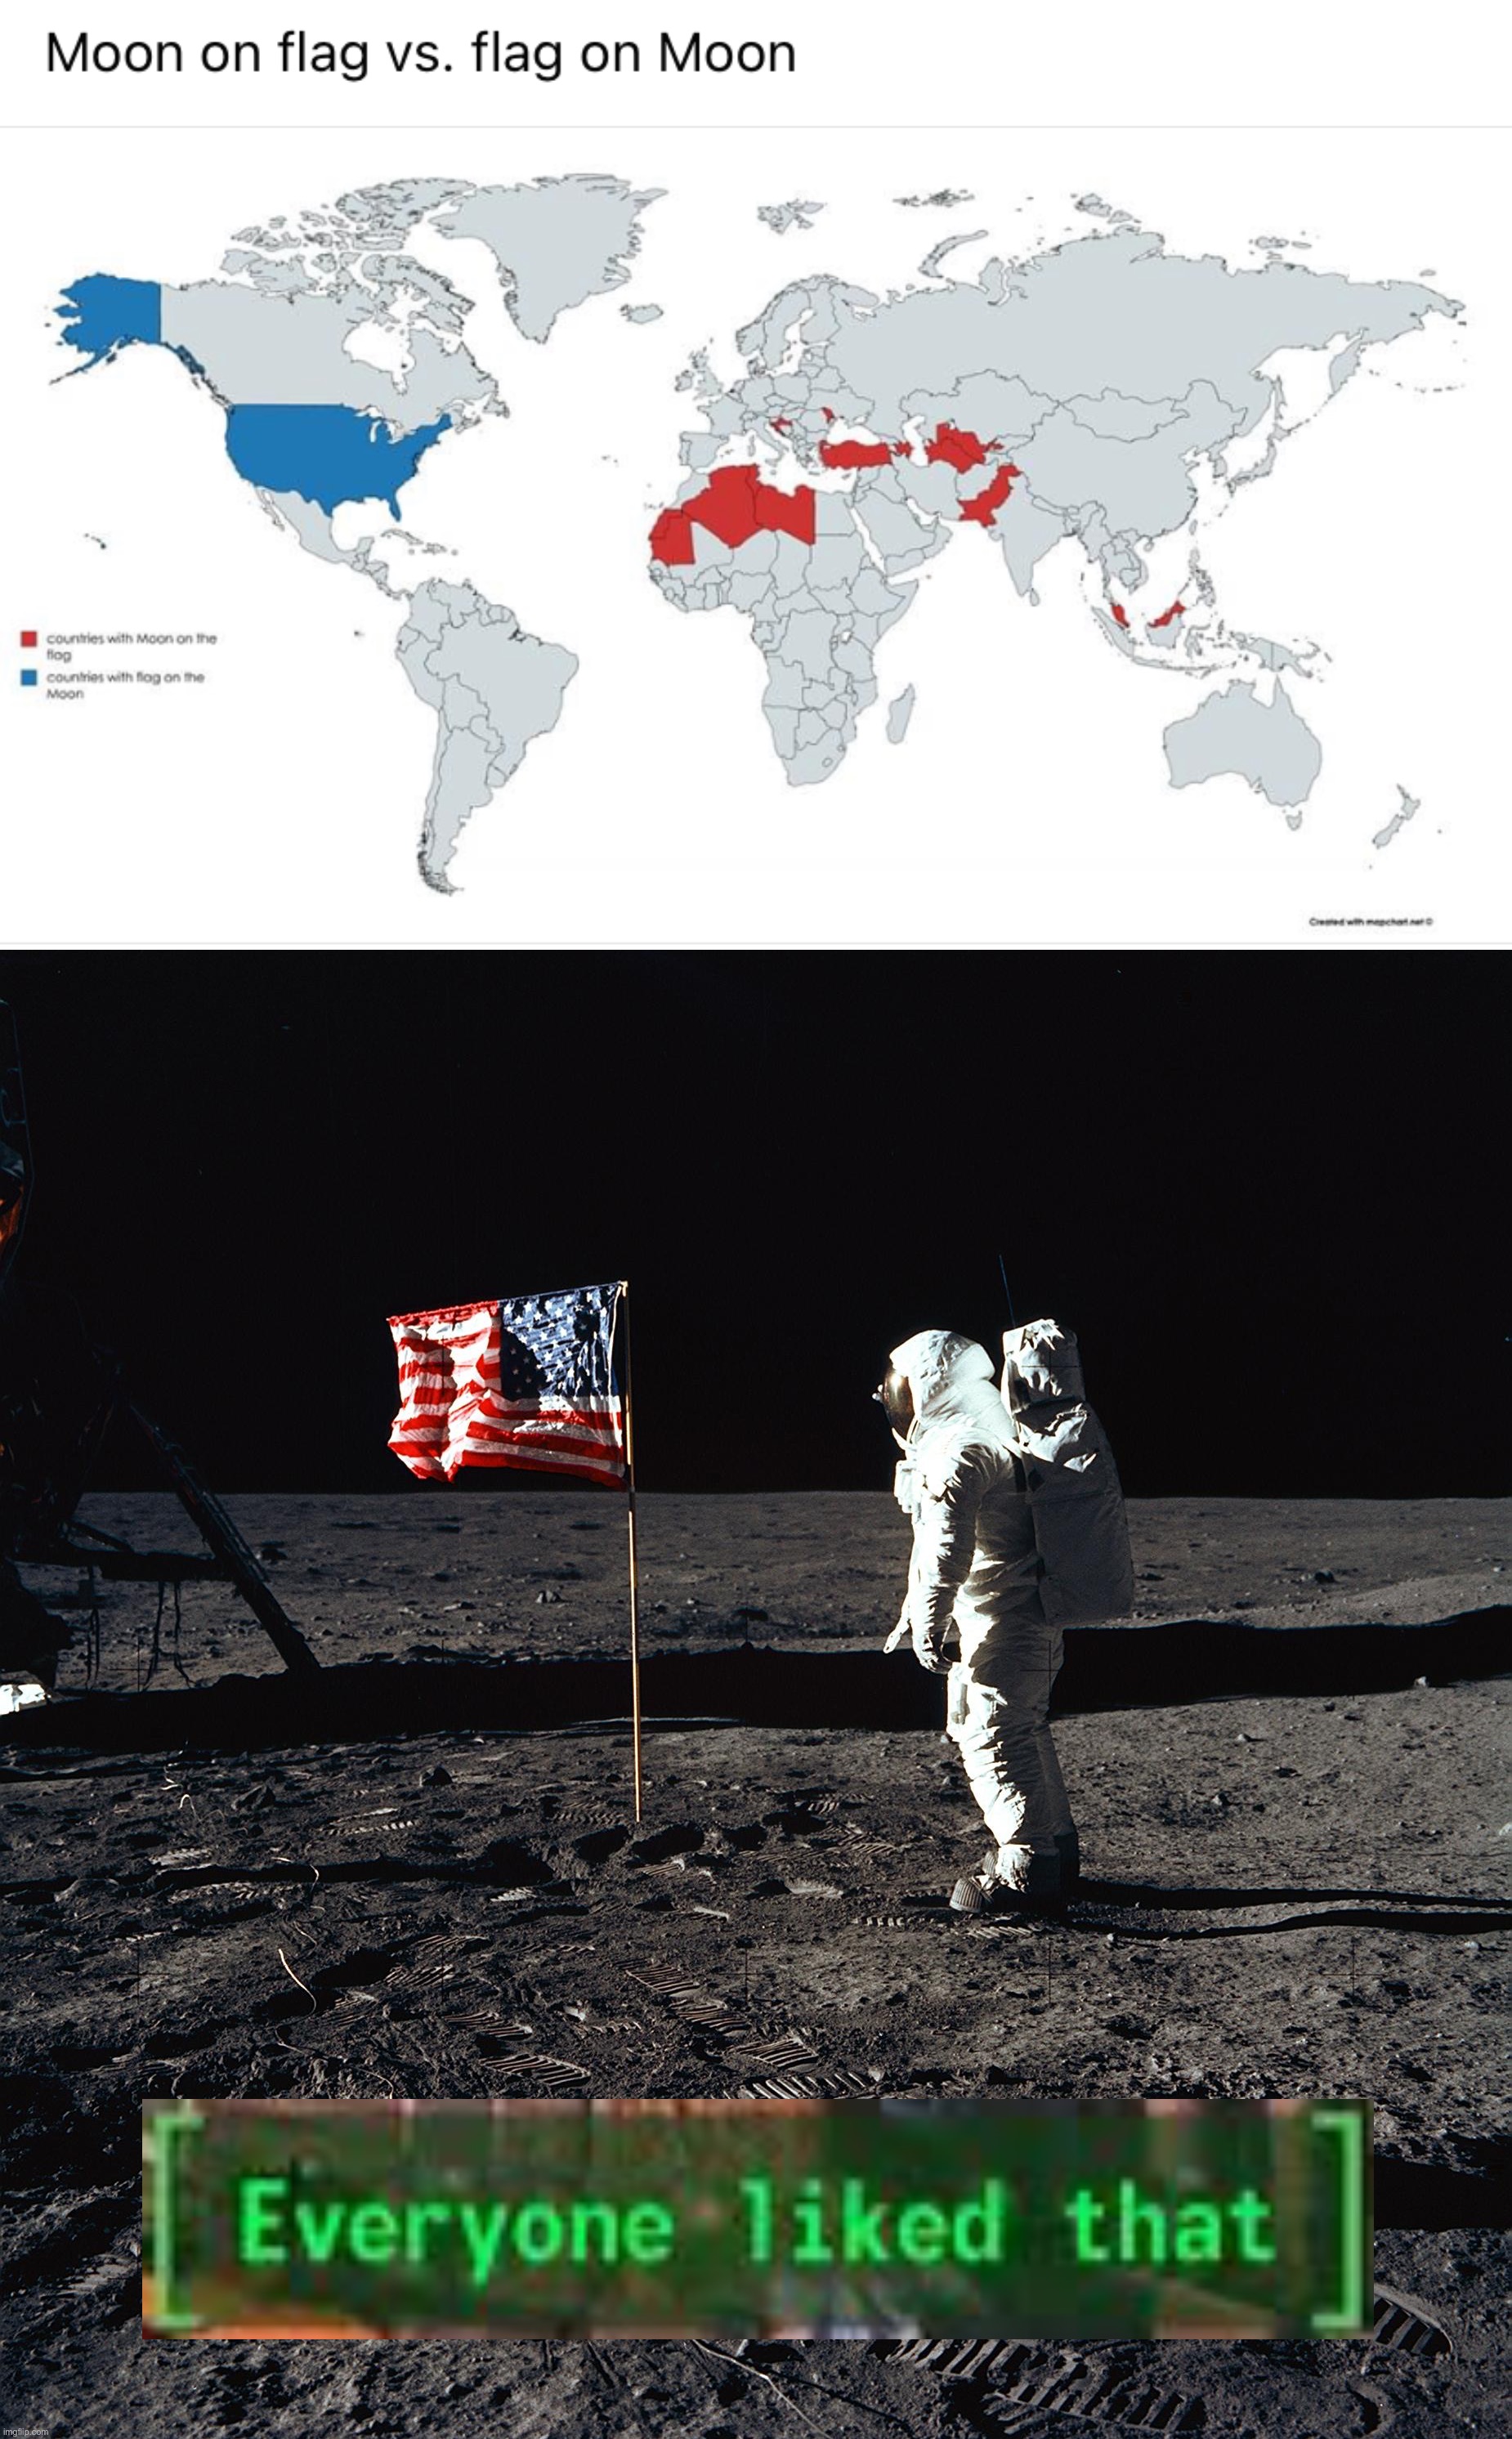 Thought I’d make one for the Spaceists/NASAcucks. Believe whatever you want to! XD | image tagged in moon on flag vs flag on moon,usa flag on moon,flat earth,flat earthers,flat earth club,flat earth dome | made w/ Imgflip meme maker